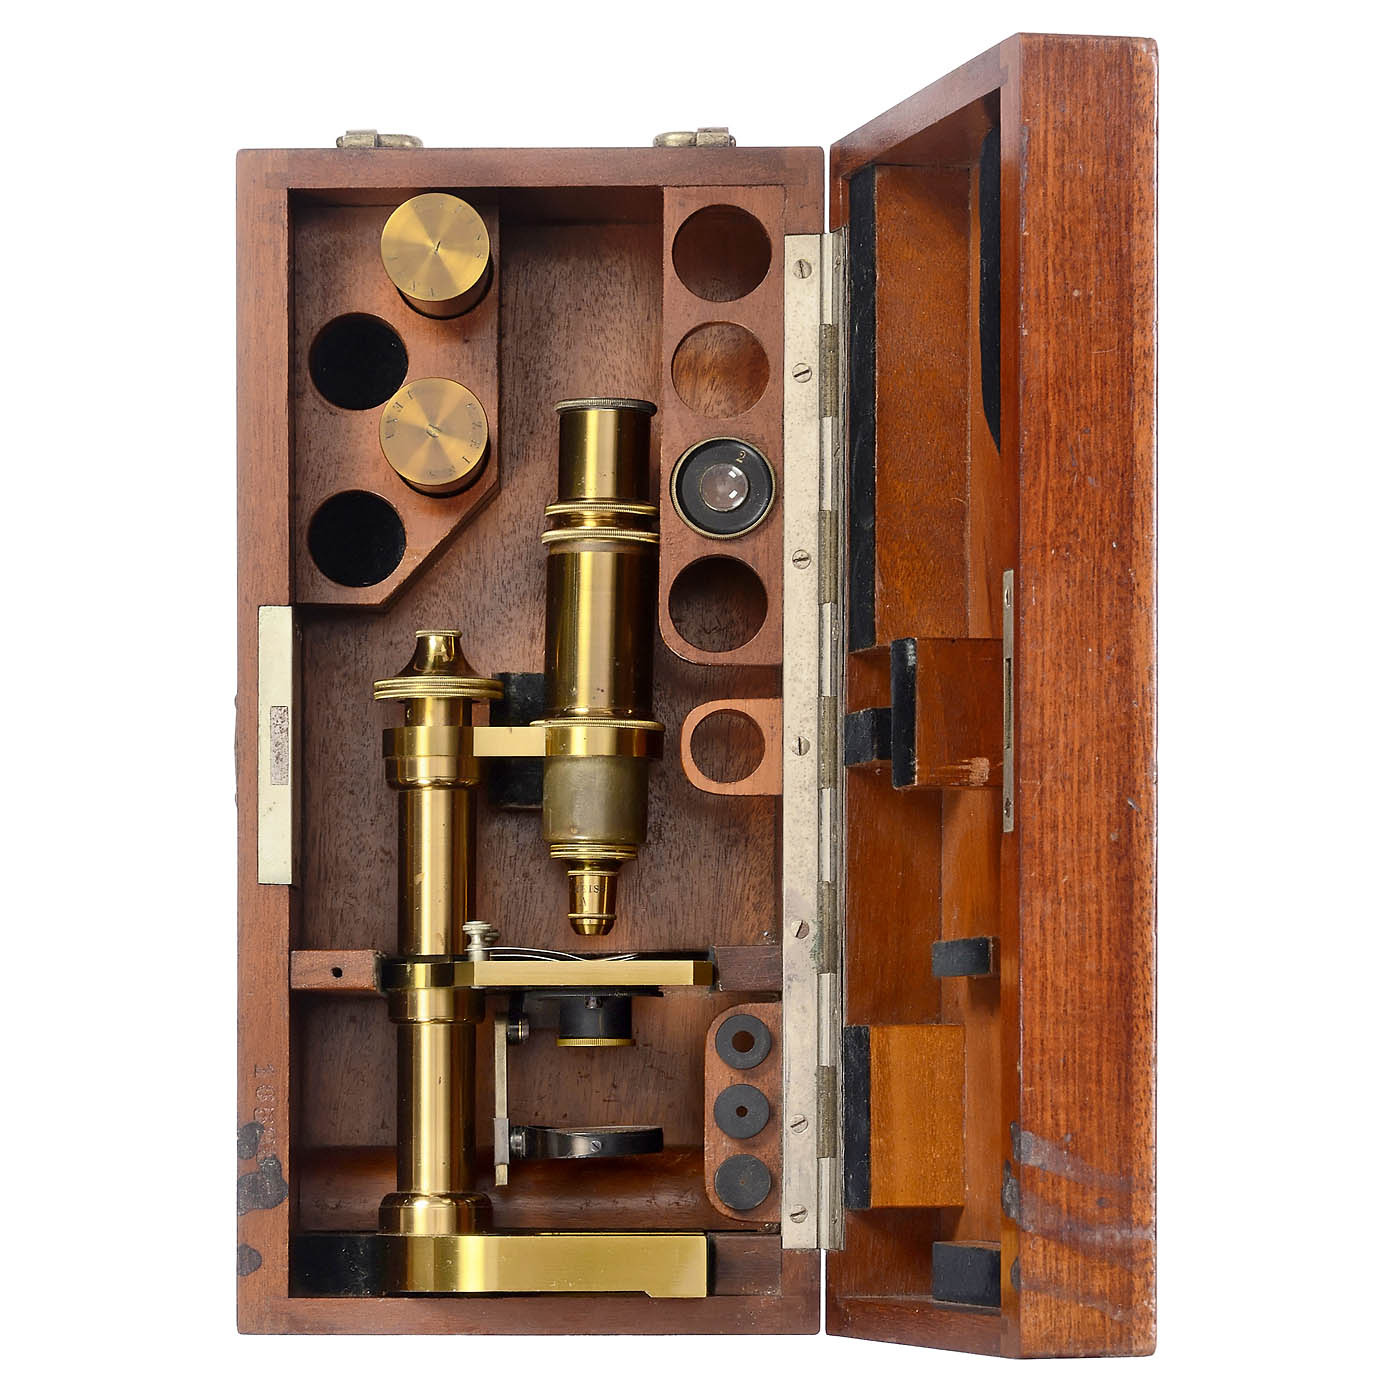 Microscope by Zeiss, c. 1885 - Image 2 of 2